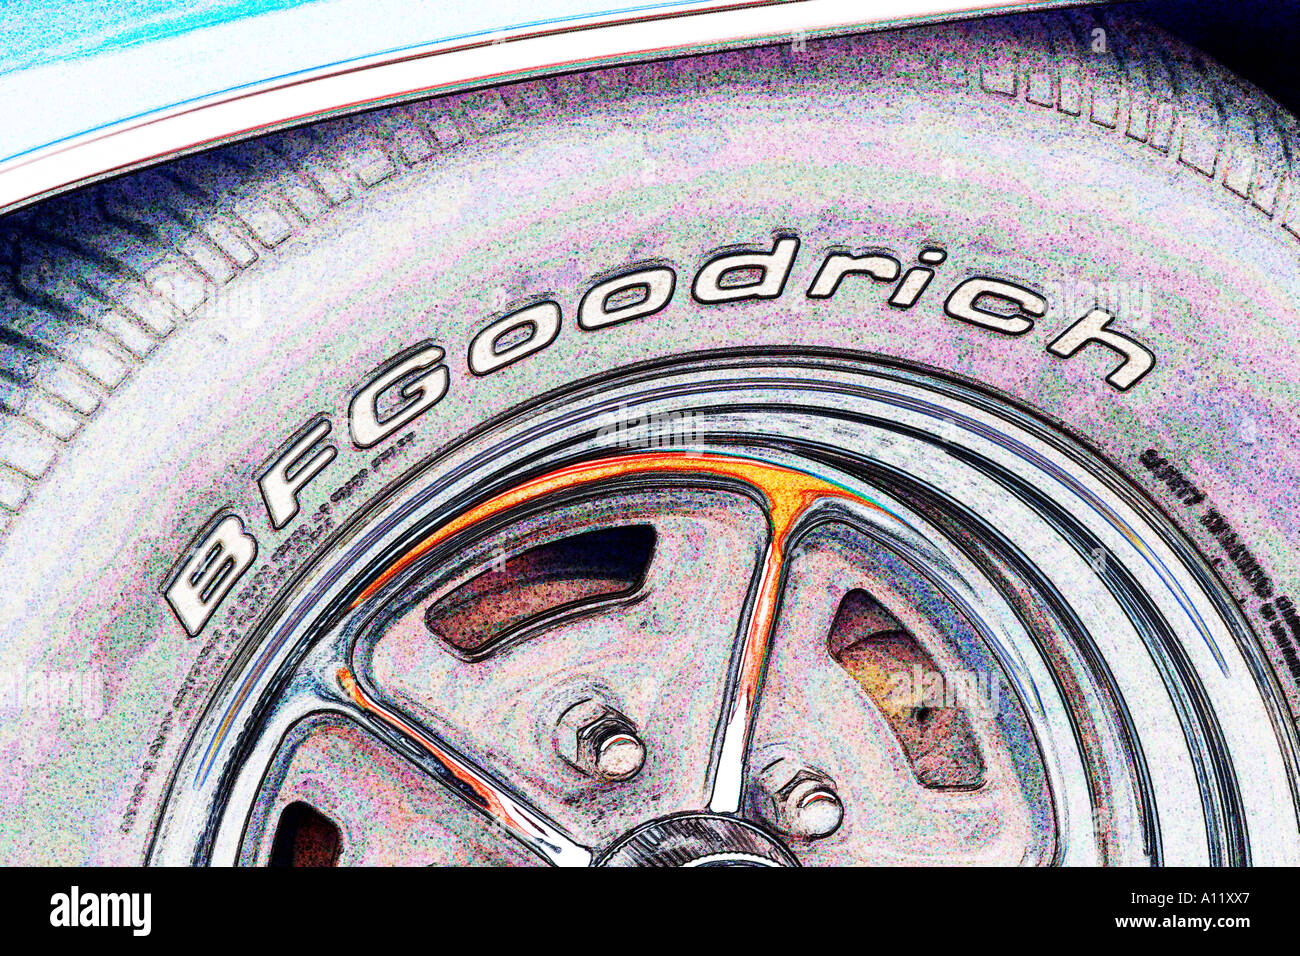 BF Goodrich tire and wheel at a car show altered with special effects Stock Photo